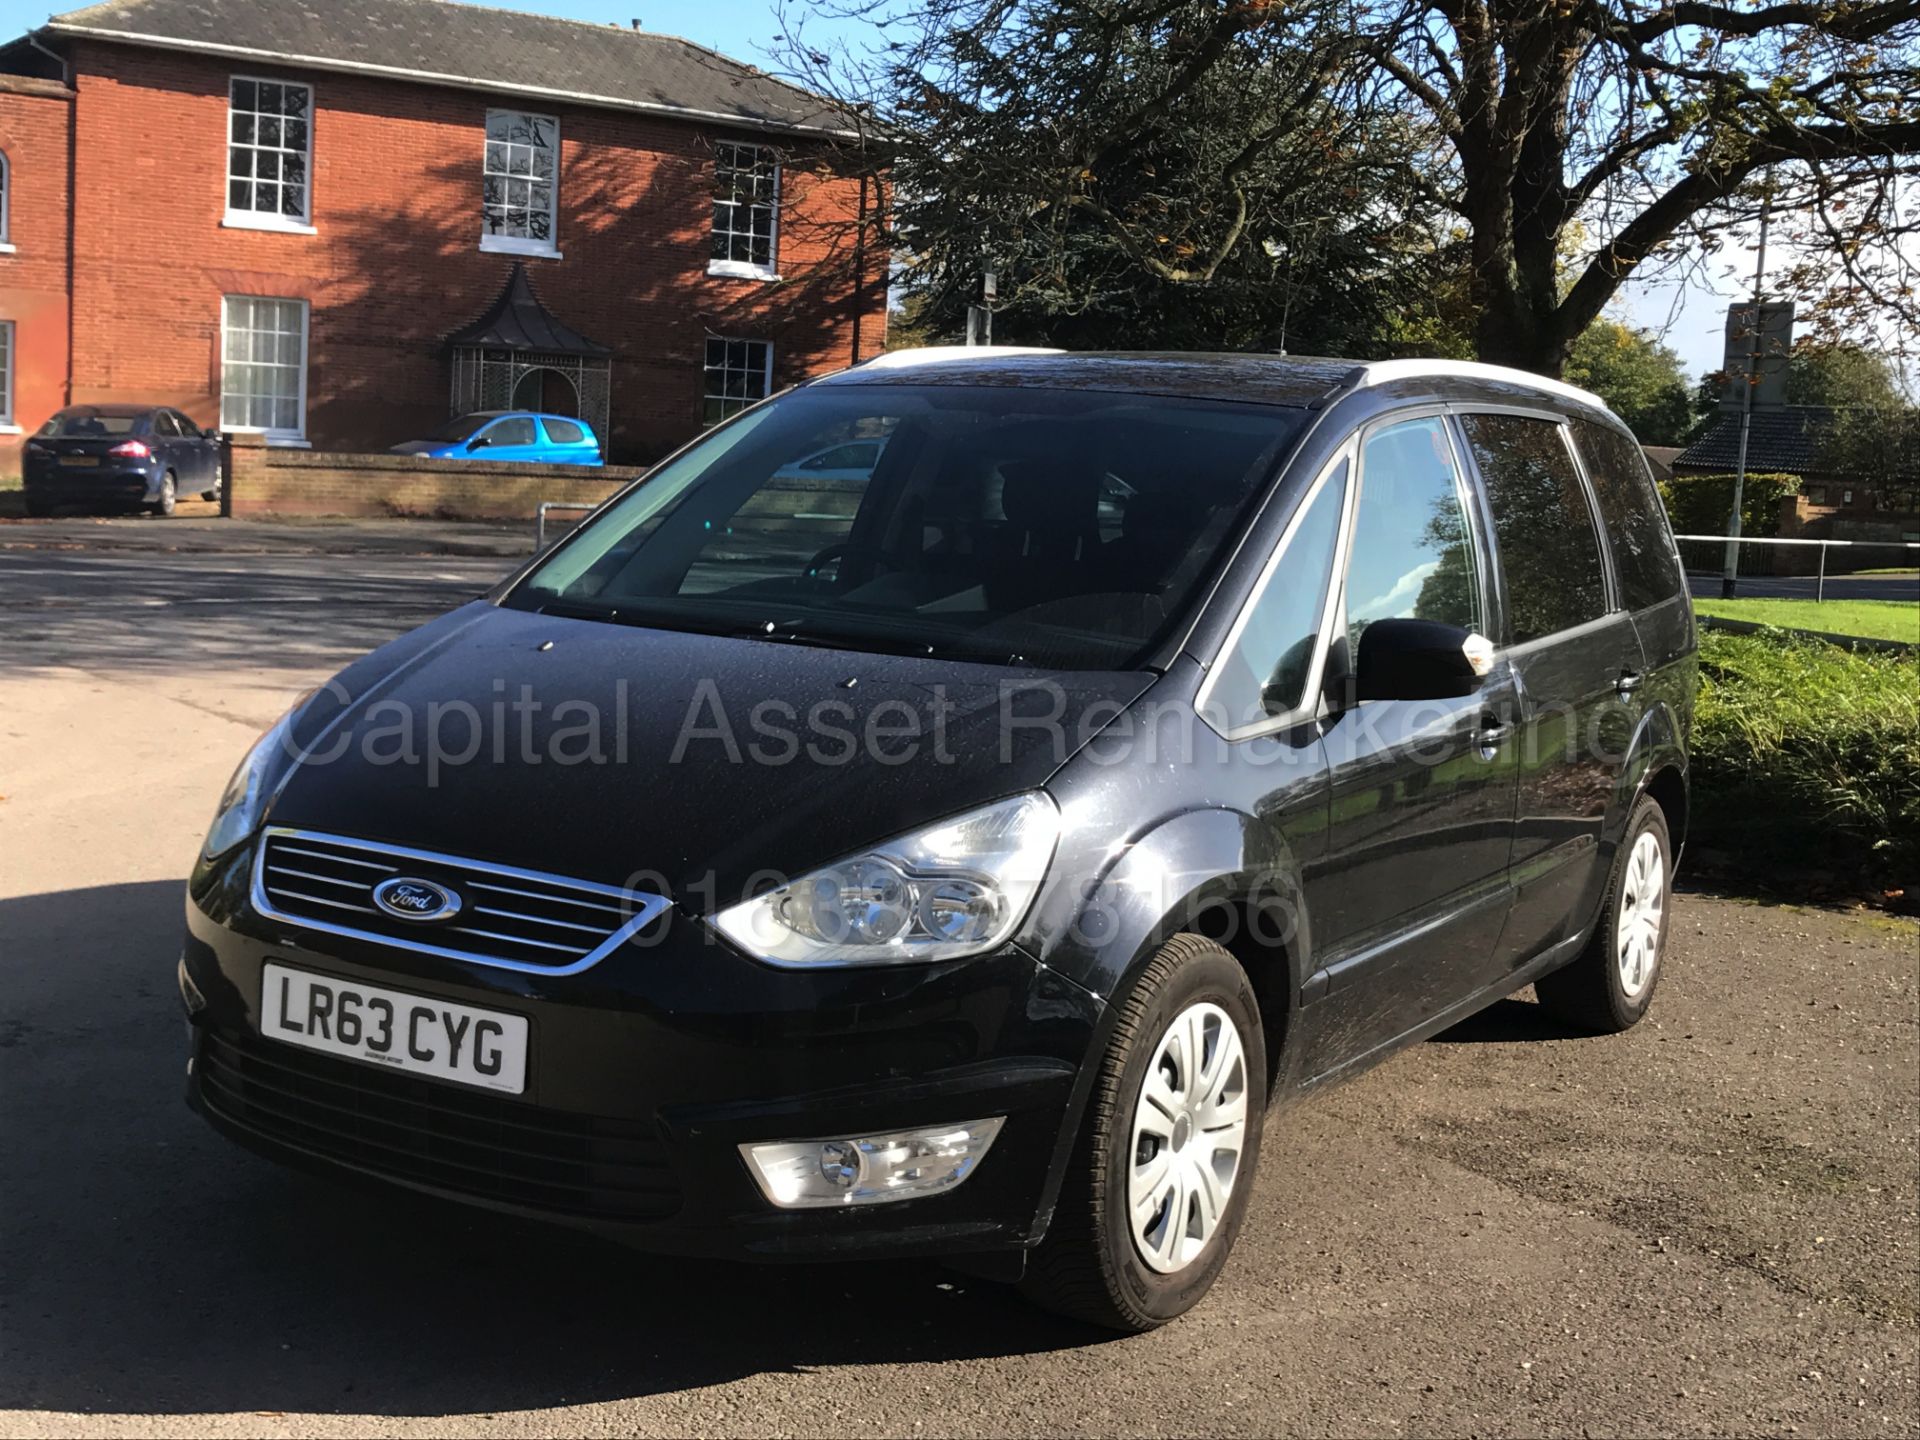 (ON SALE) FORD GALAXY 'ZETEC' 7 SEATER MPV (2014 MODEL) '2.0 TDCI -140 BHP' (1 OWNER) *FULL HISTORY* - Image 3 of 28